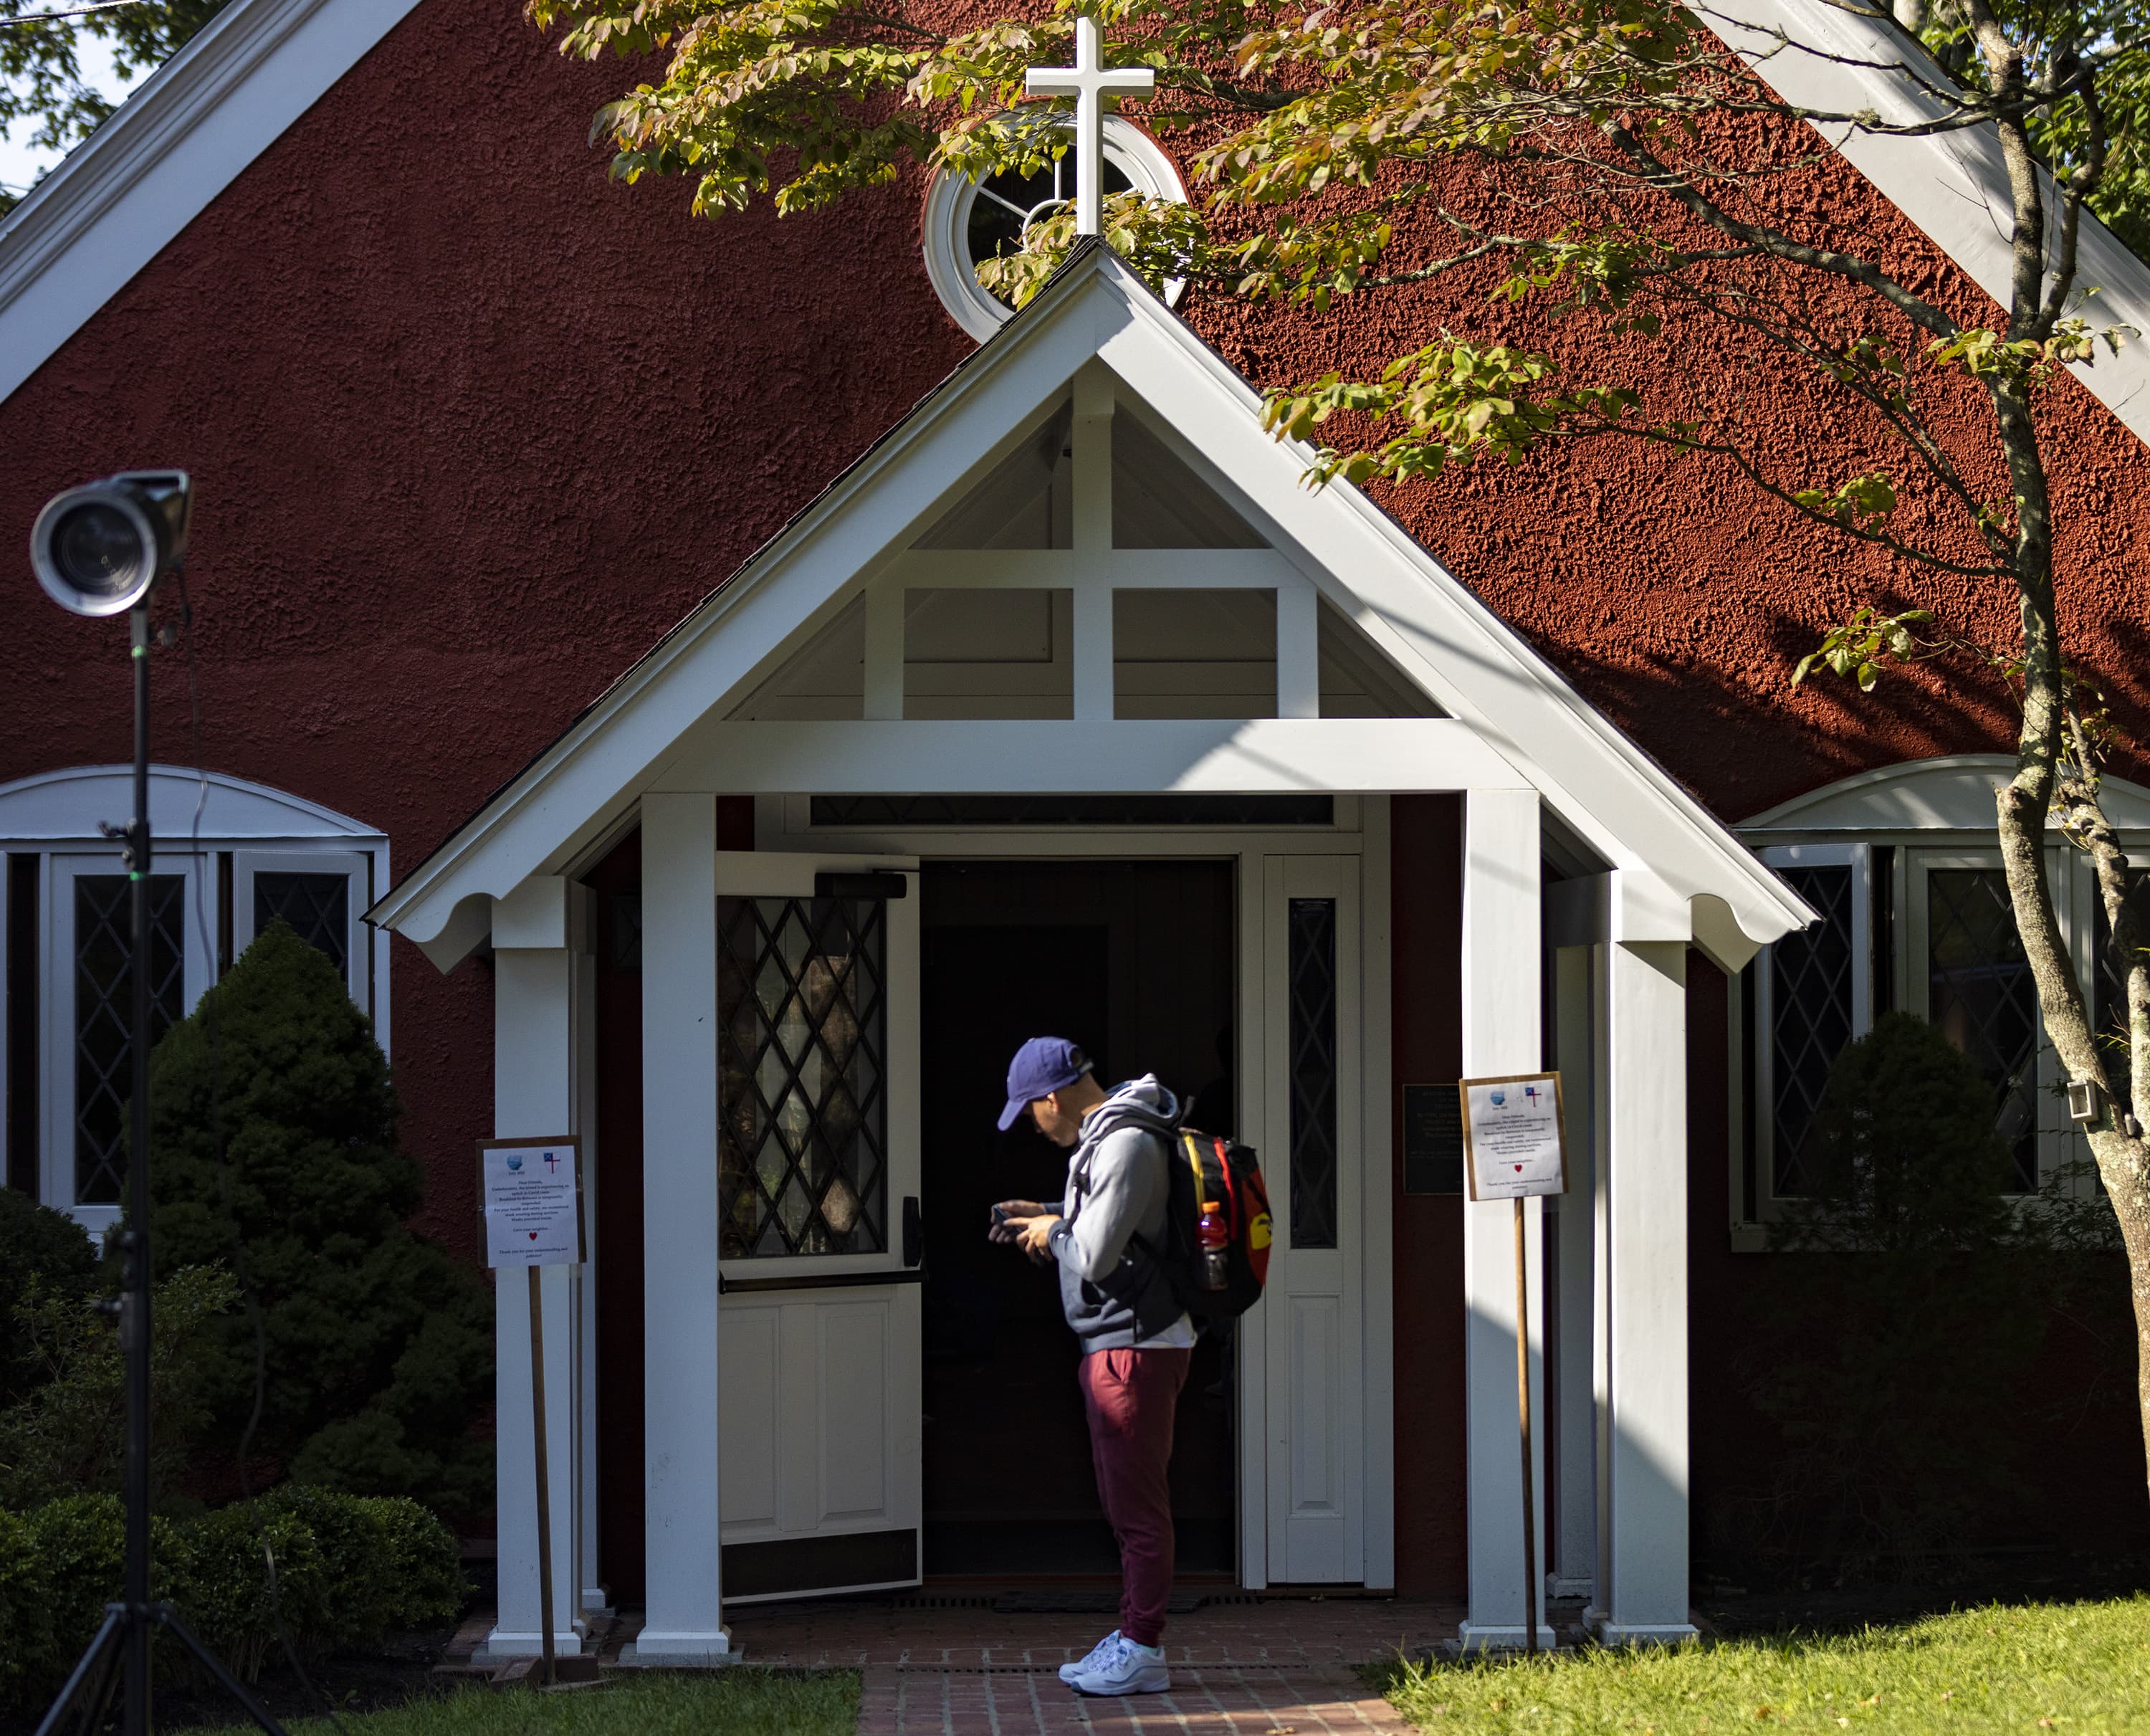 A Venezuelan immigrant looks at his phone outside of the St. Andrews Church before boarding buses to leave Edgartown. (Jesse Costa/WBUR)